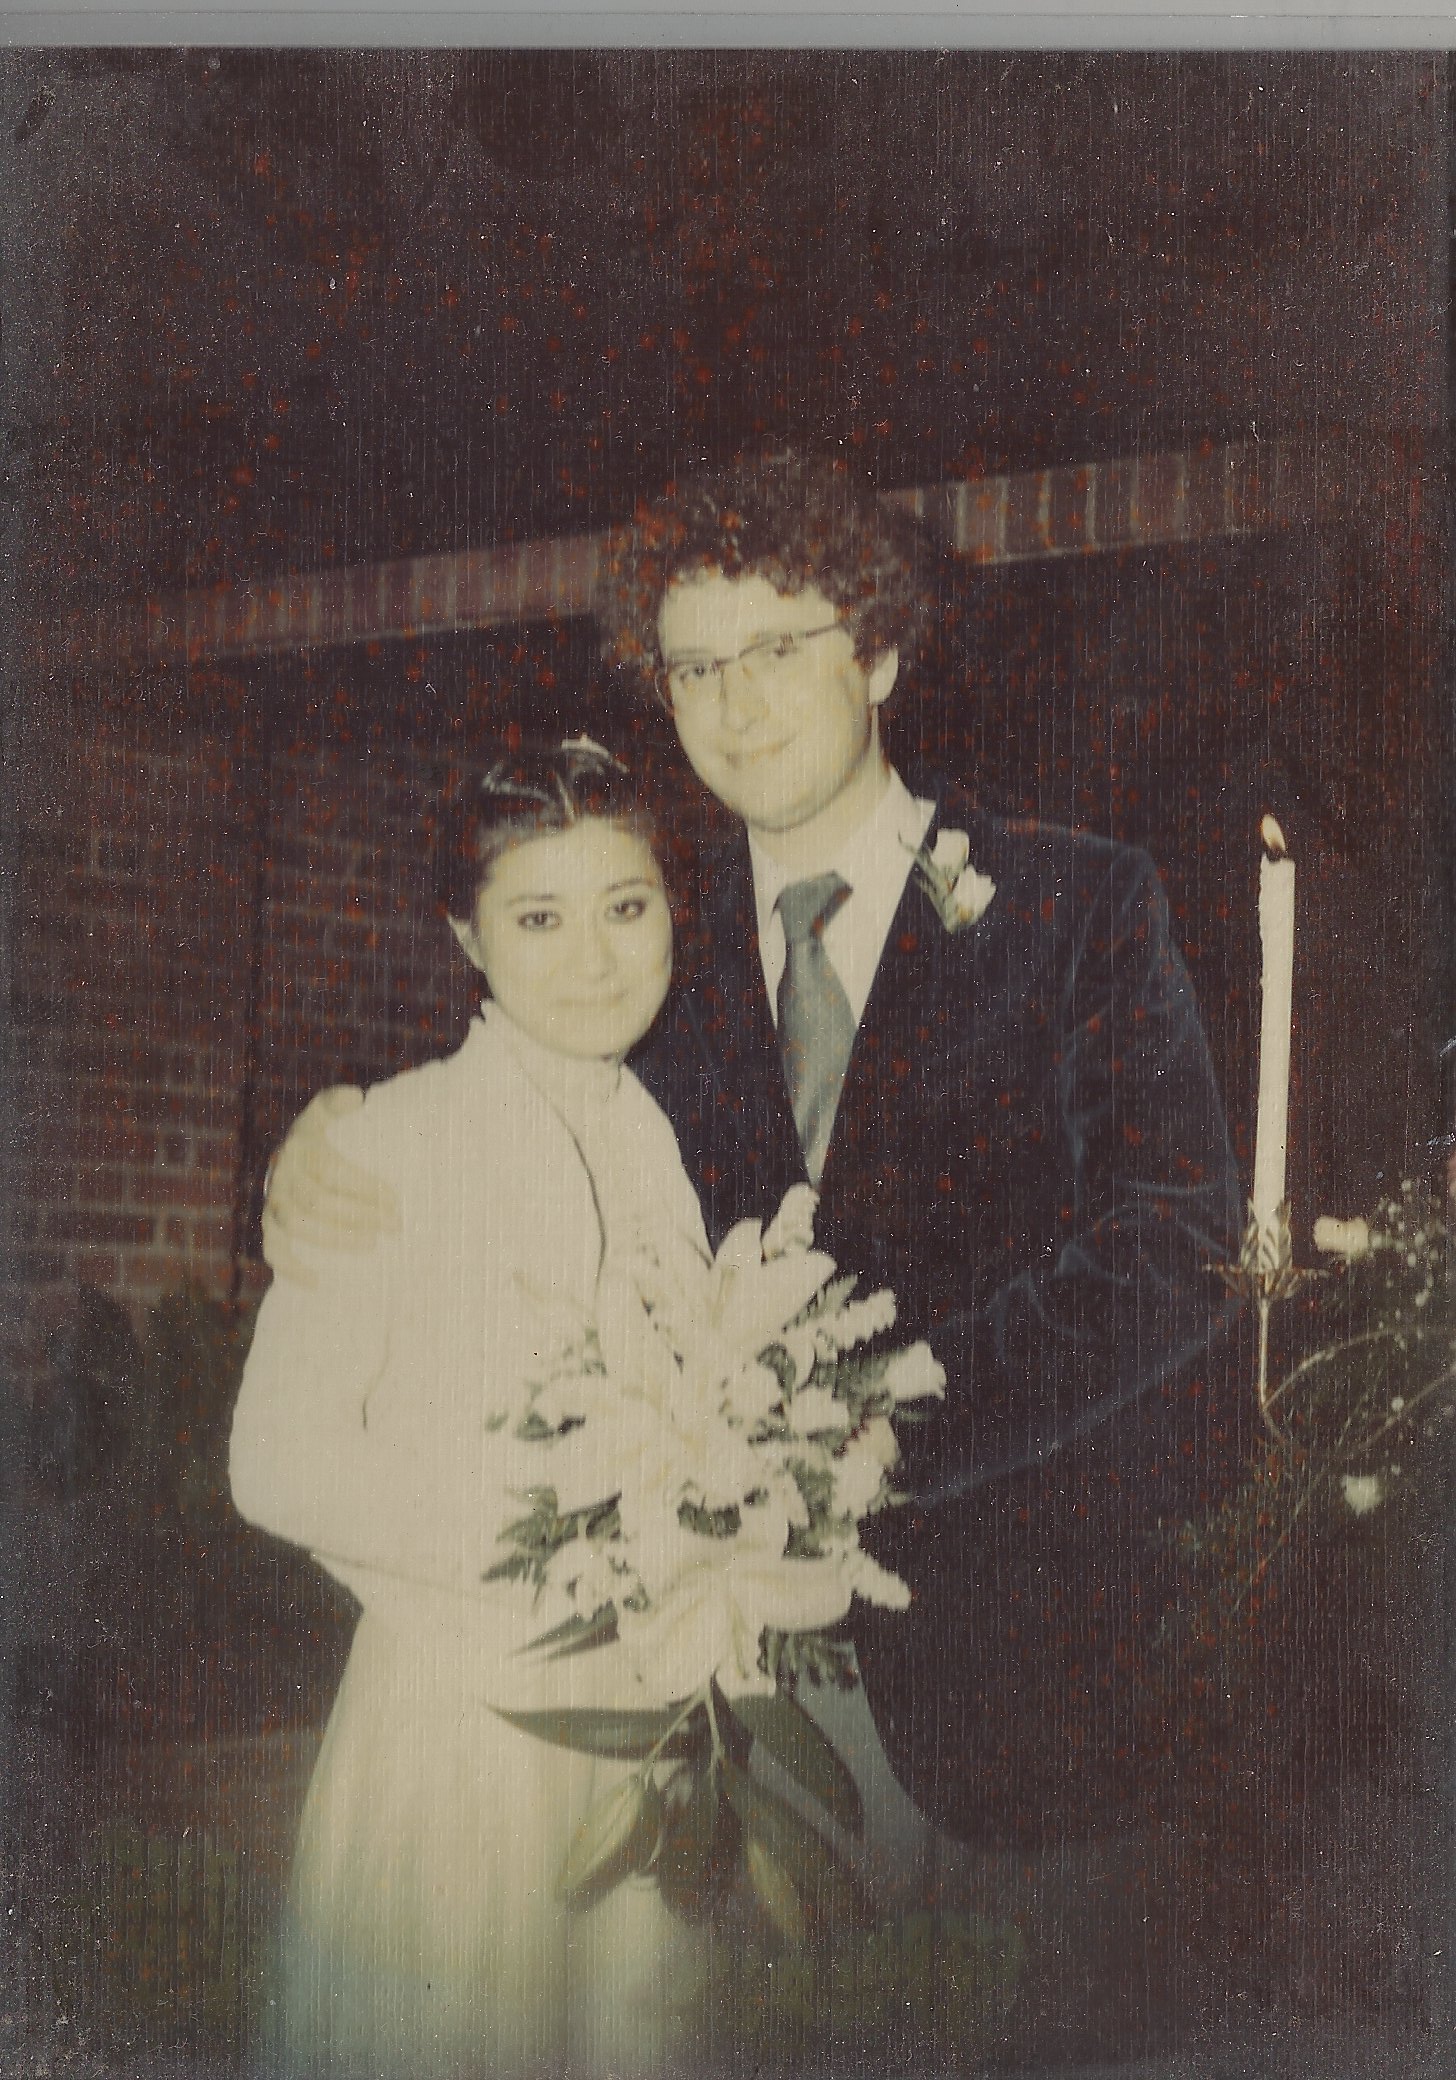 Paul and Chika on their wedding day